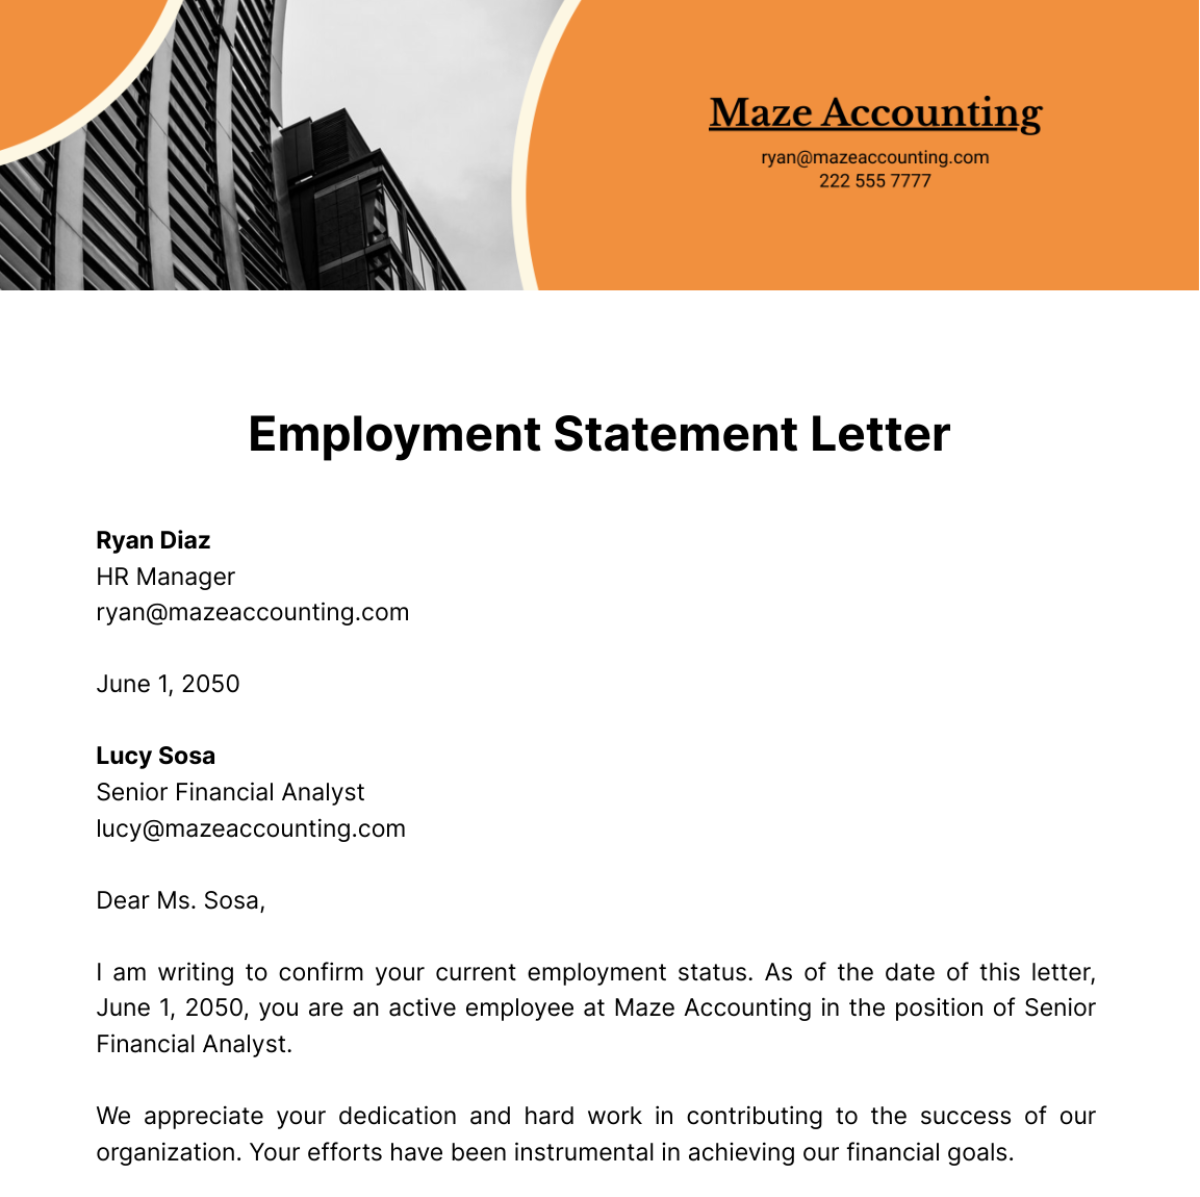 Employment Statement Letter Template